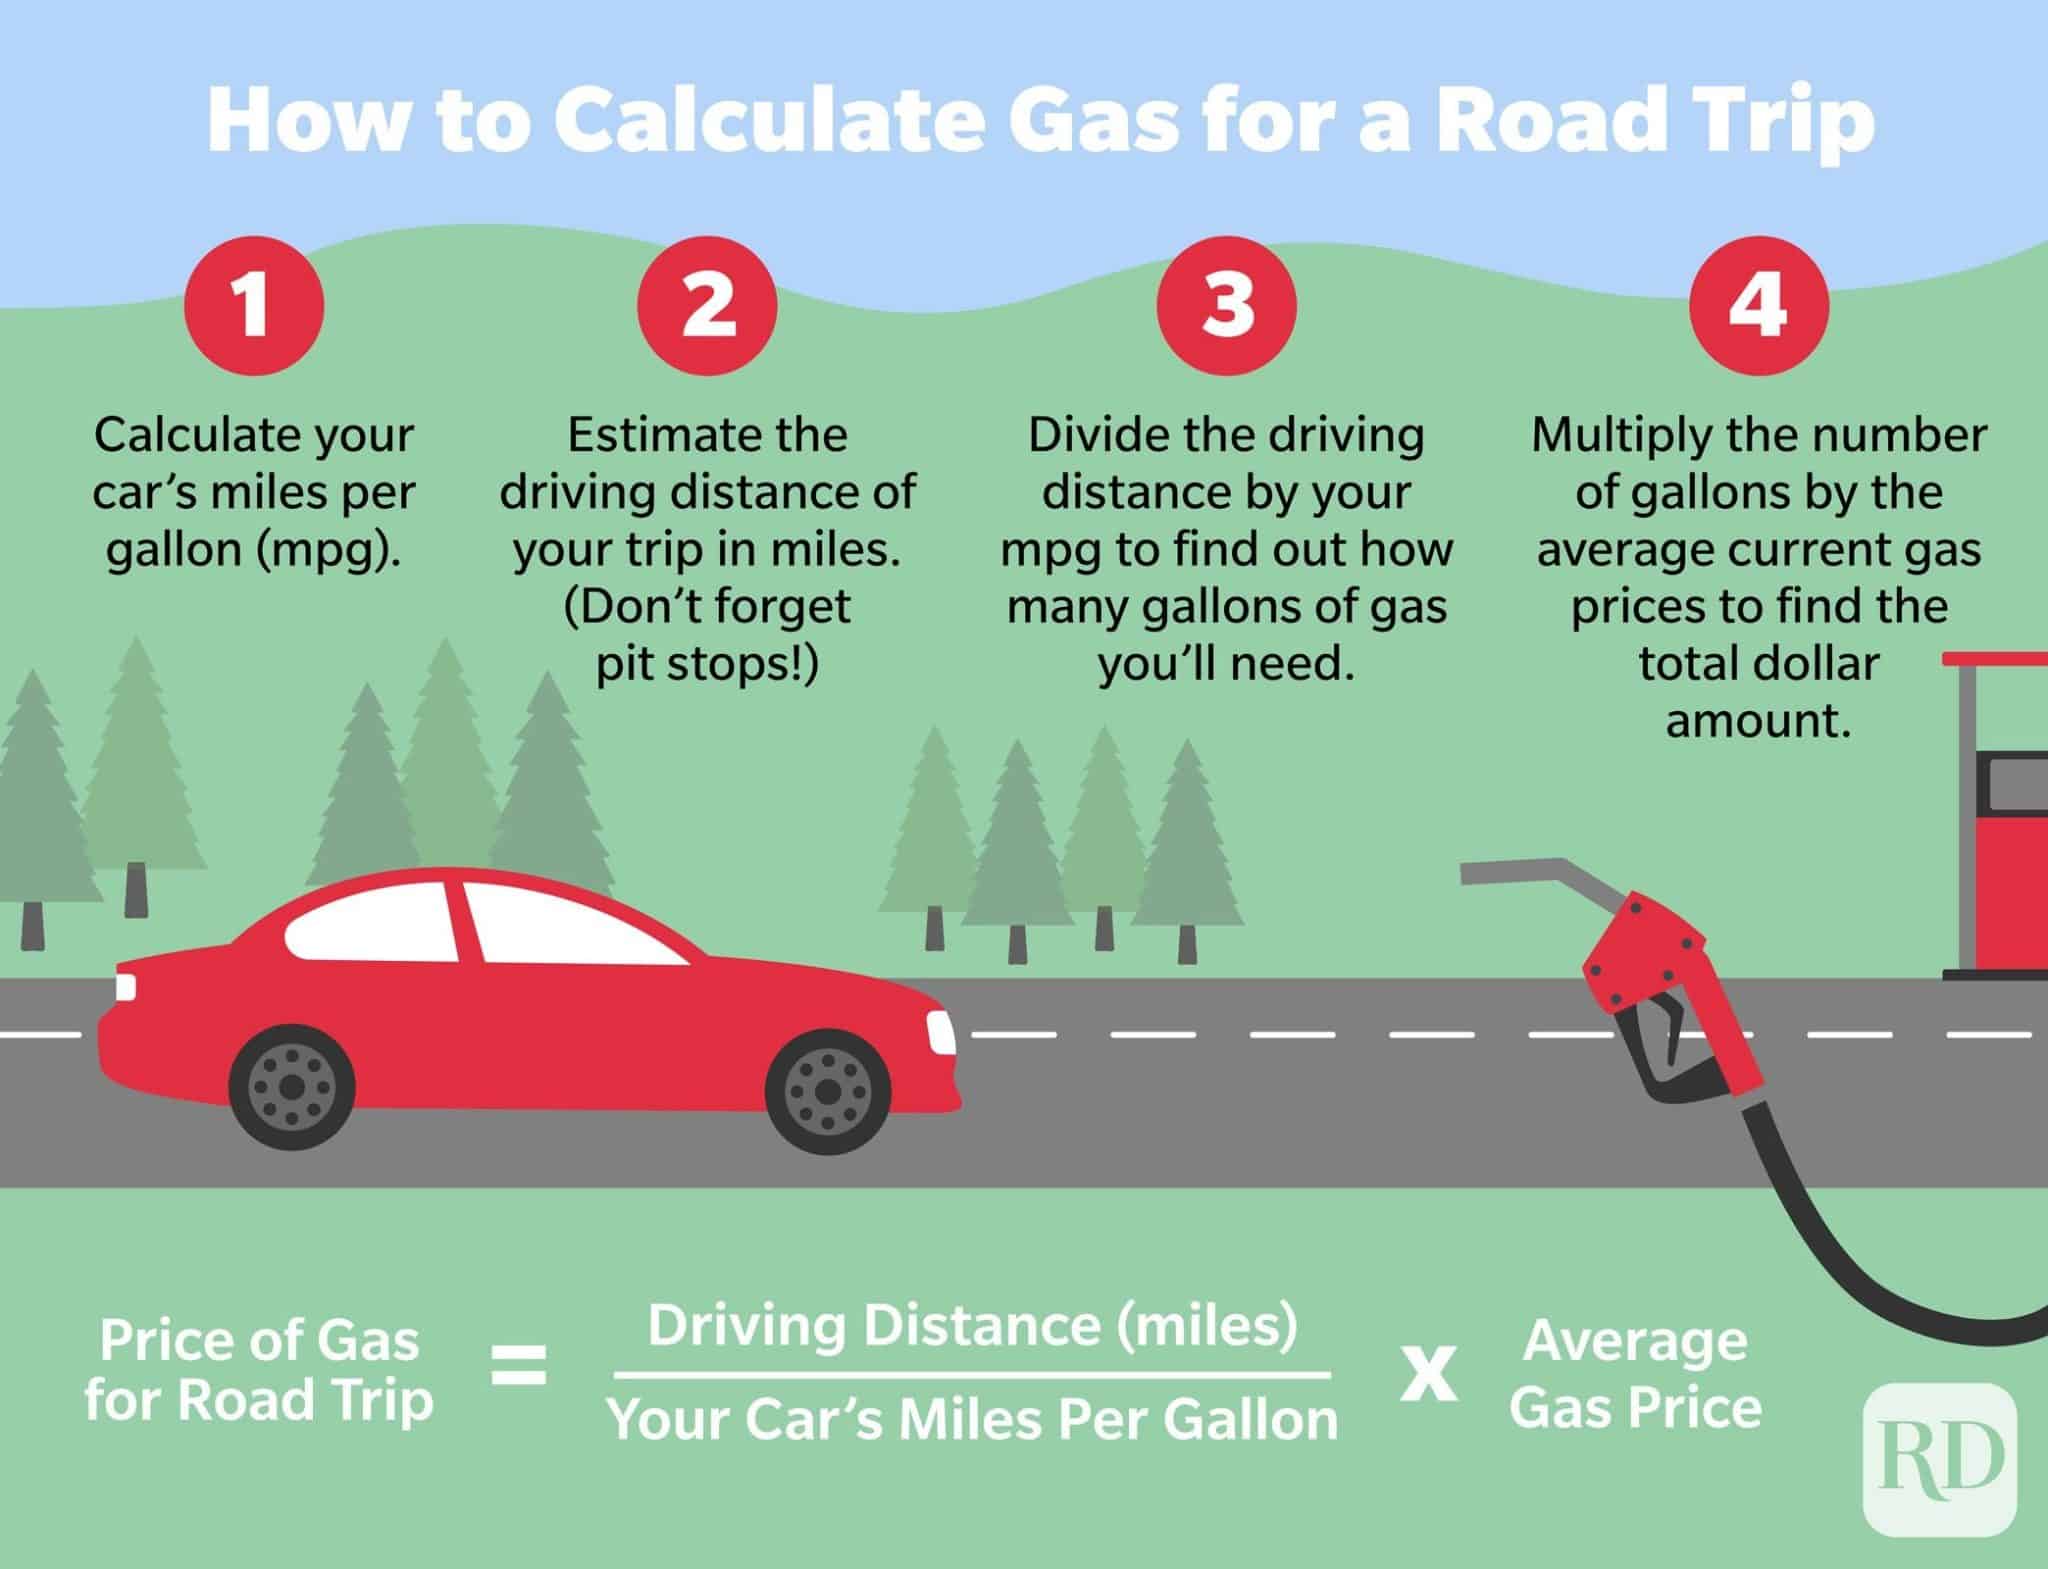 Maximizing Your Road Trip: How to Travel 340 Miles on Just 20 Gallons of Gas